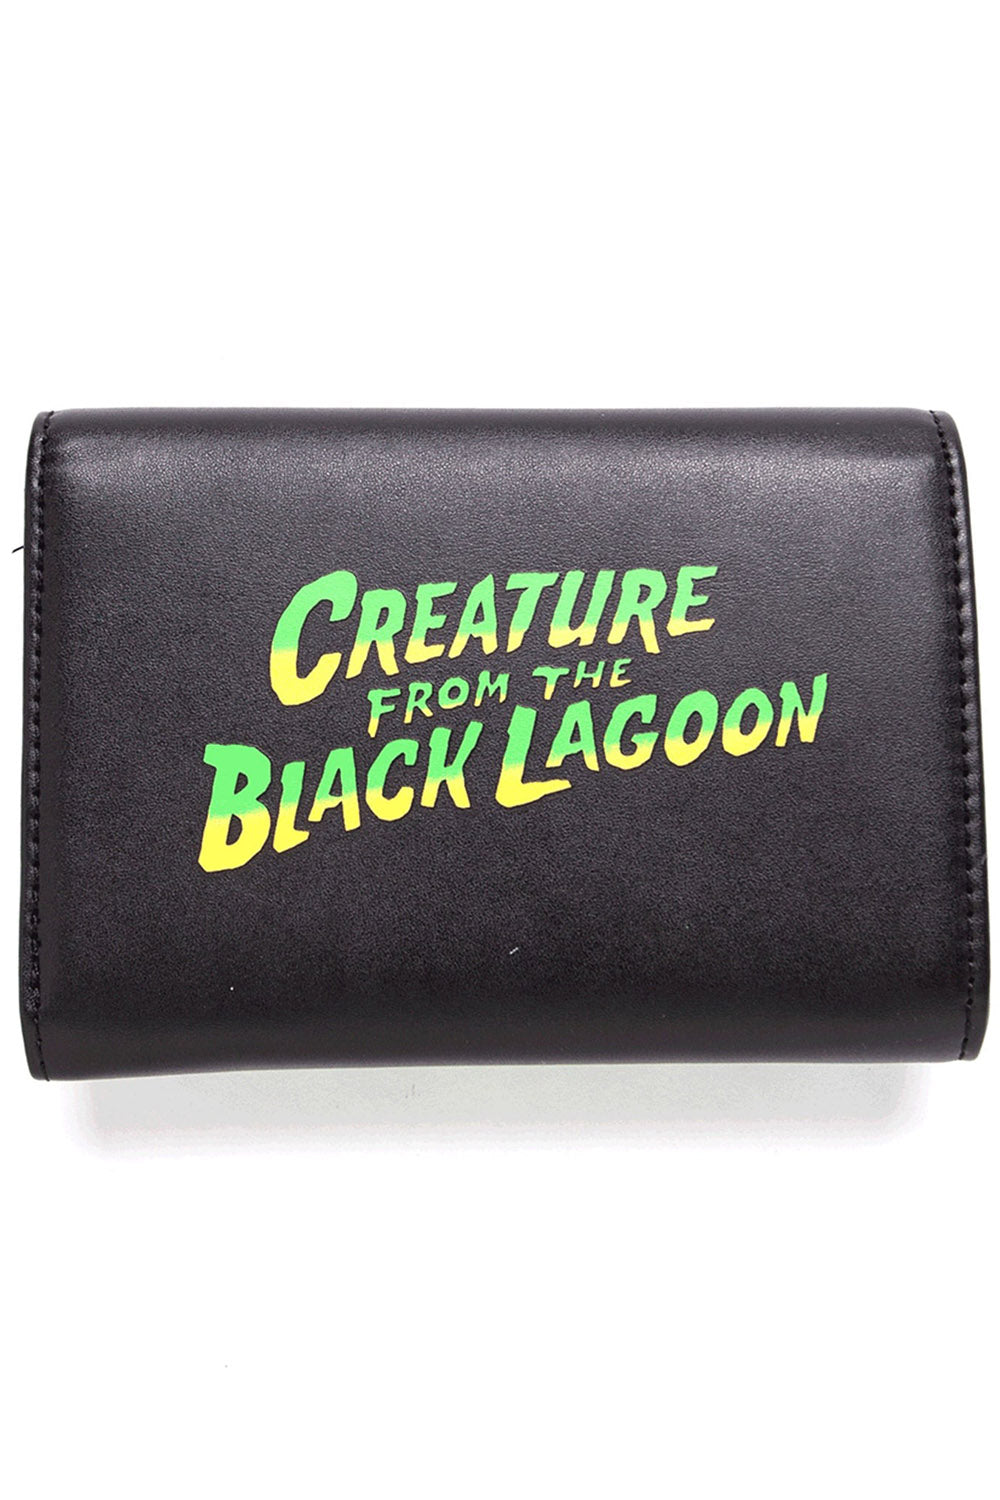 rocabilly creature from the black lagoon wallet